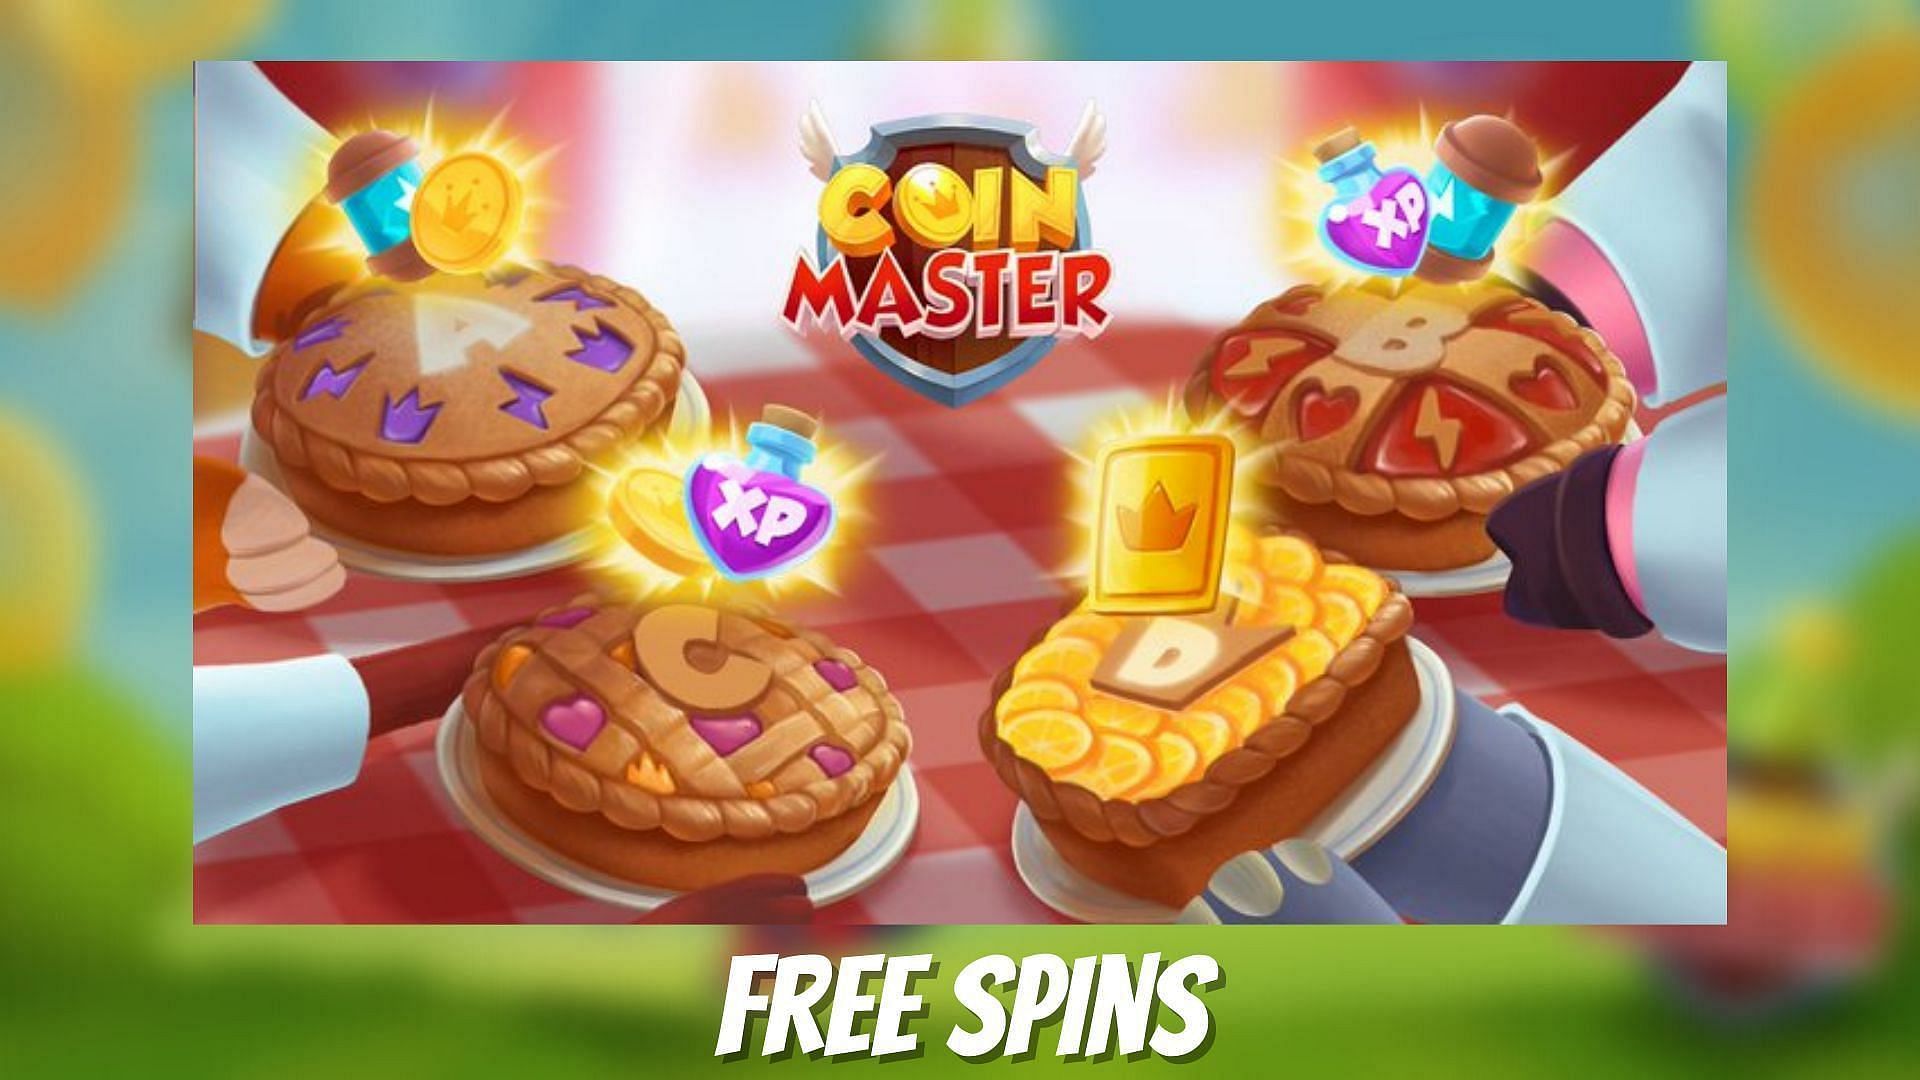 Get free spins by clicking the Coin Master twitter link (Image via Sportskeeda)